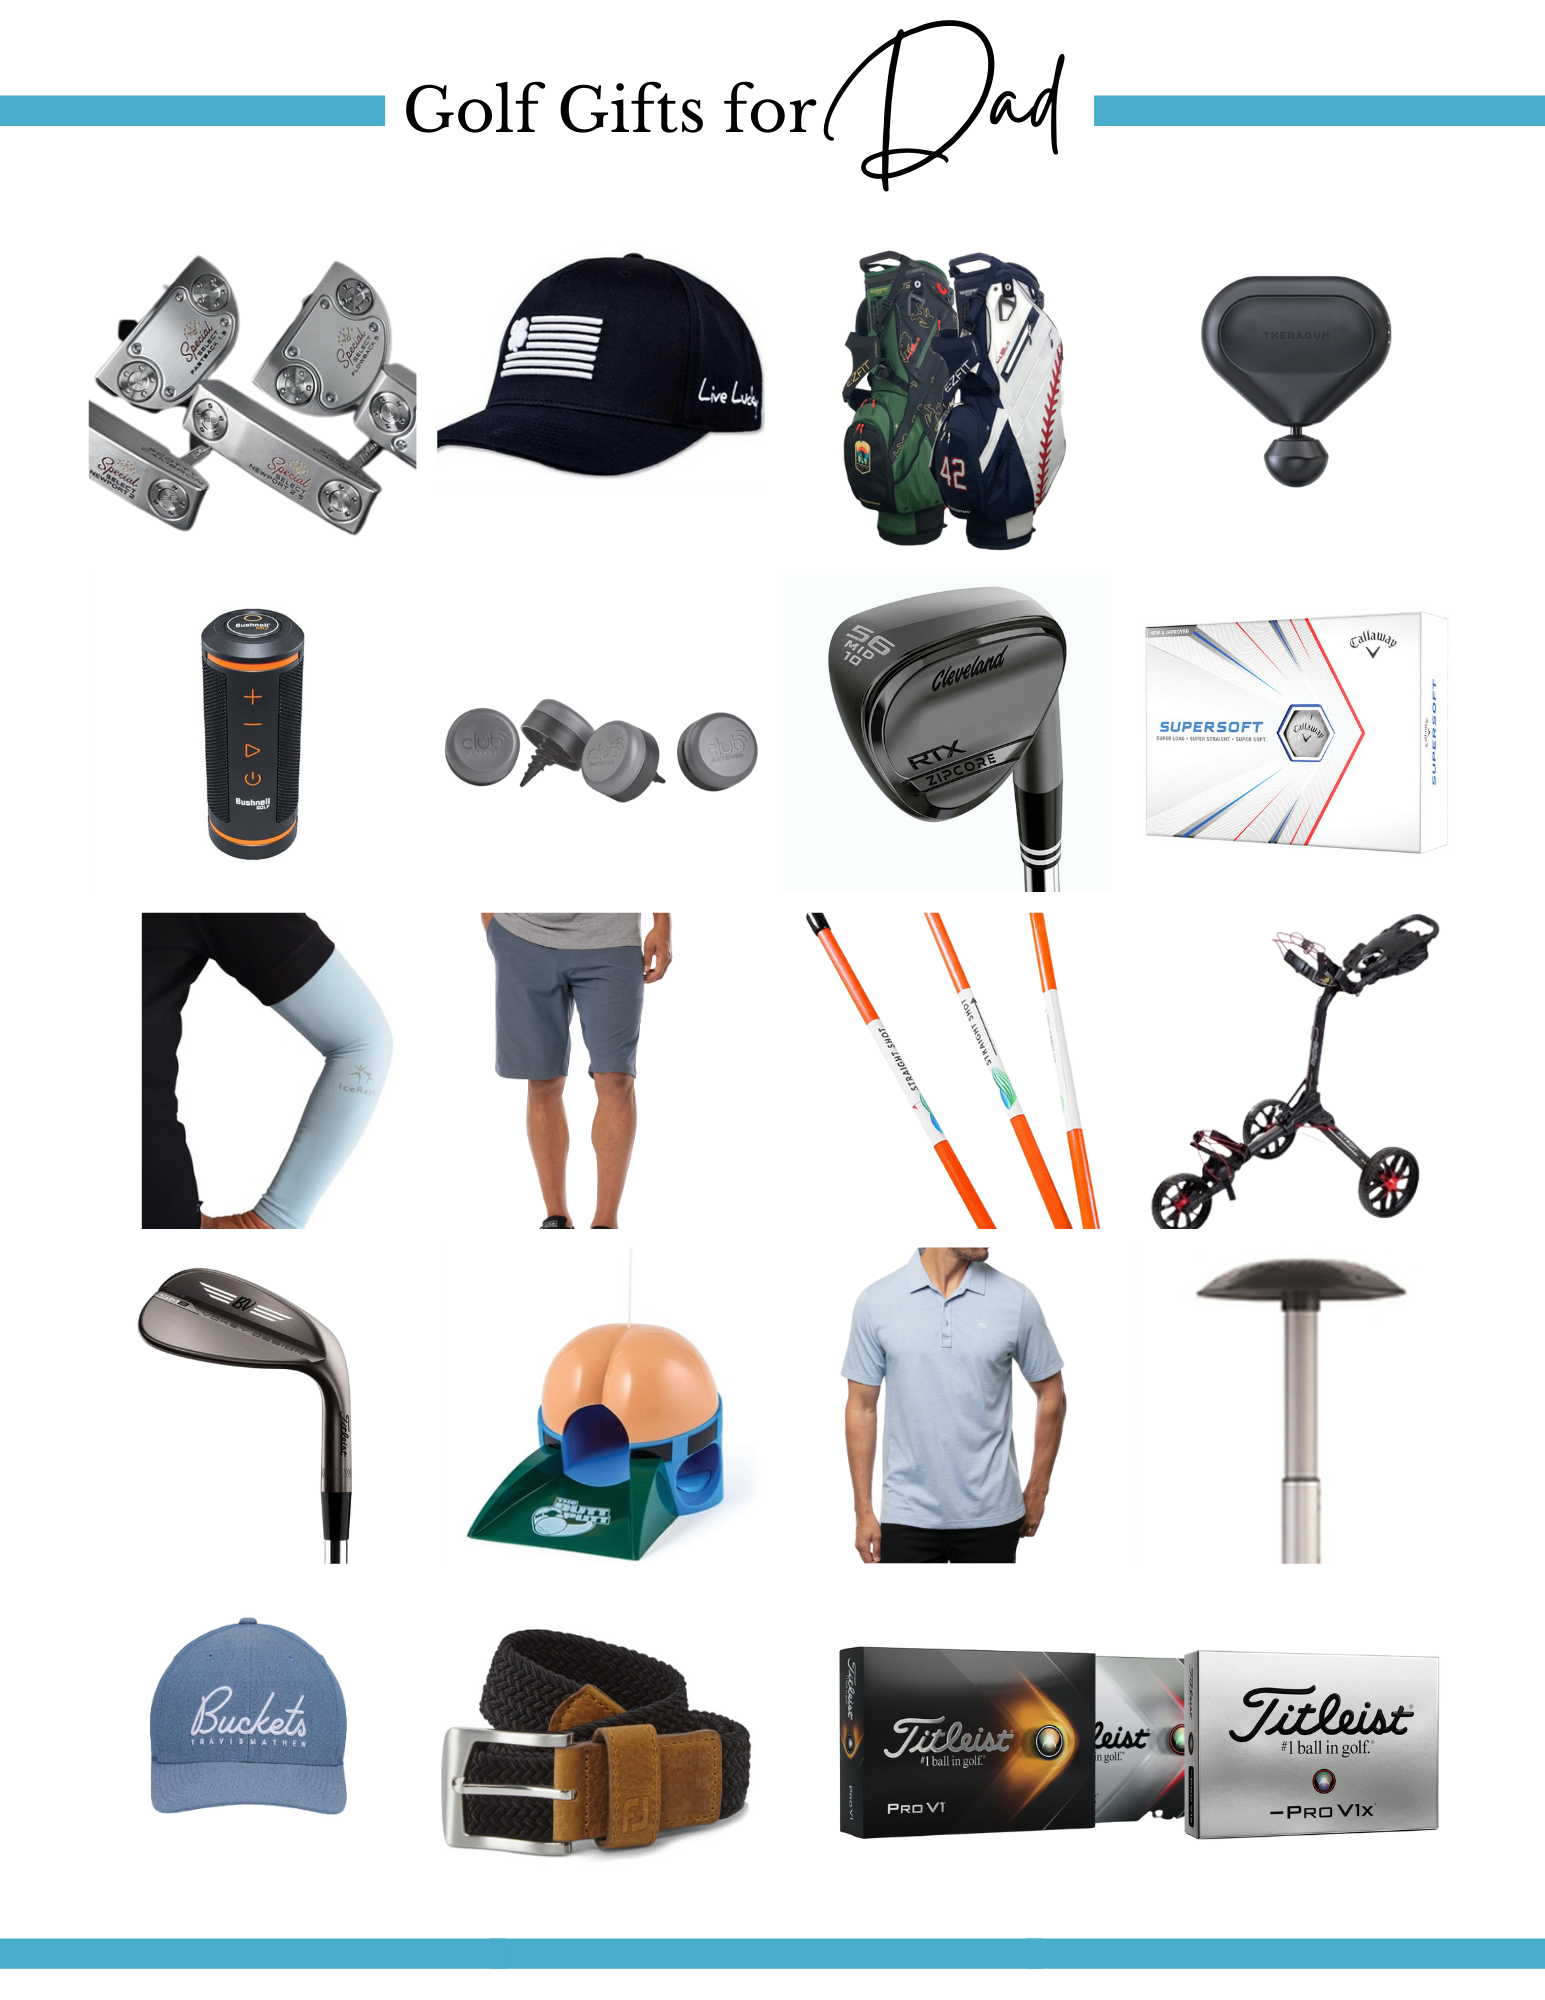 https://www.hagginoaks.com/wp-content/uploads/2022/05/Fathers-Day-Gift-Guide-Full-Size.png